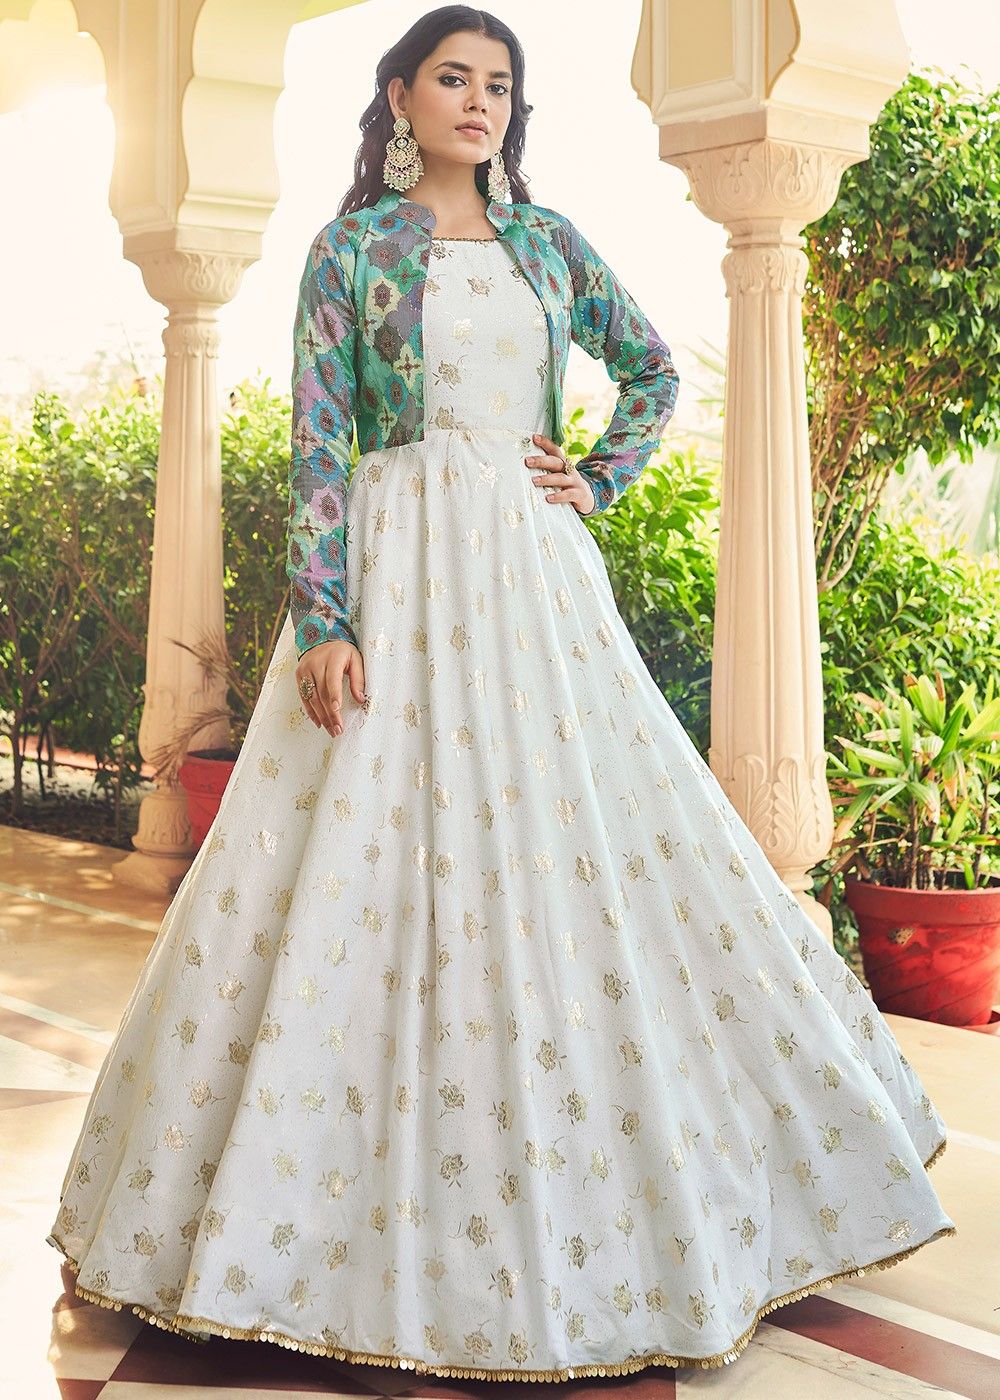 Update 77+ printed cotton gown latest